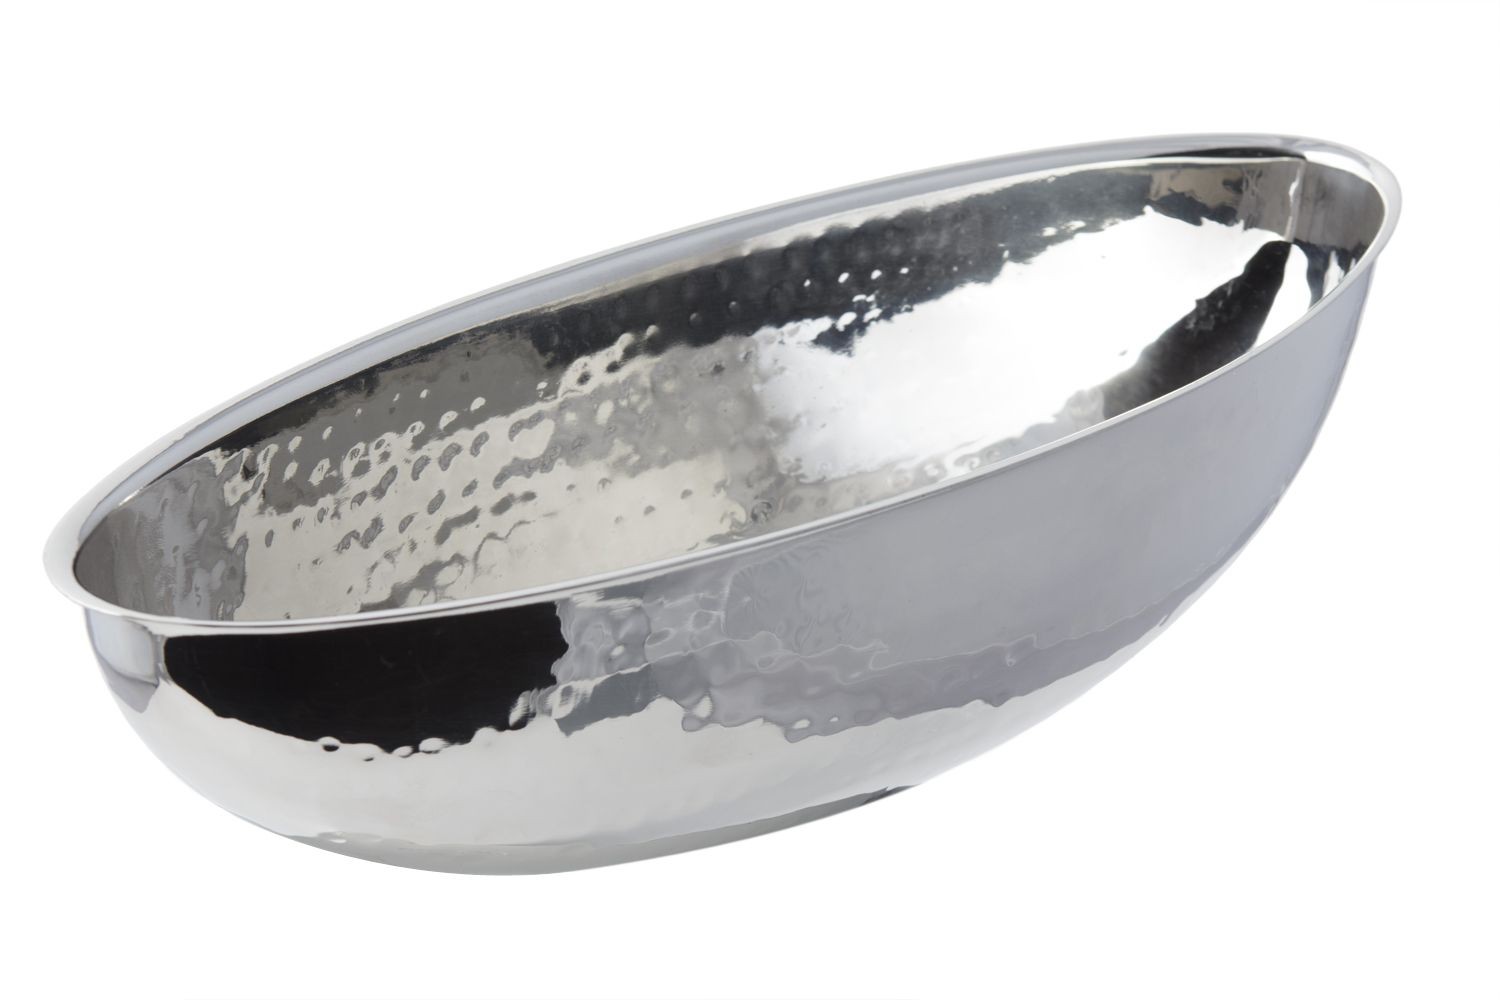 Bon Chef 61215 Stainless Steel Nut Bowl with Hammered Finish, 1 Qt.